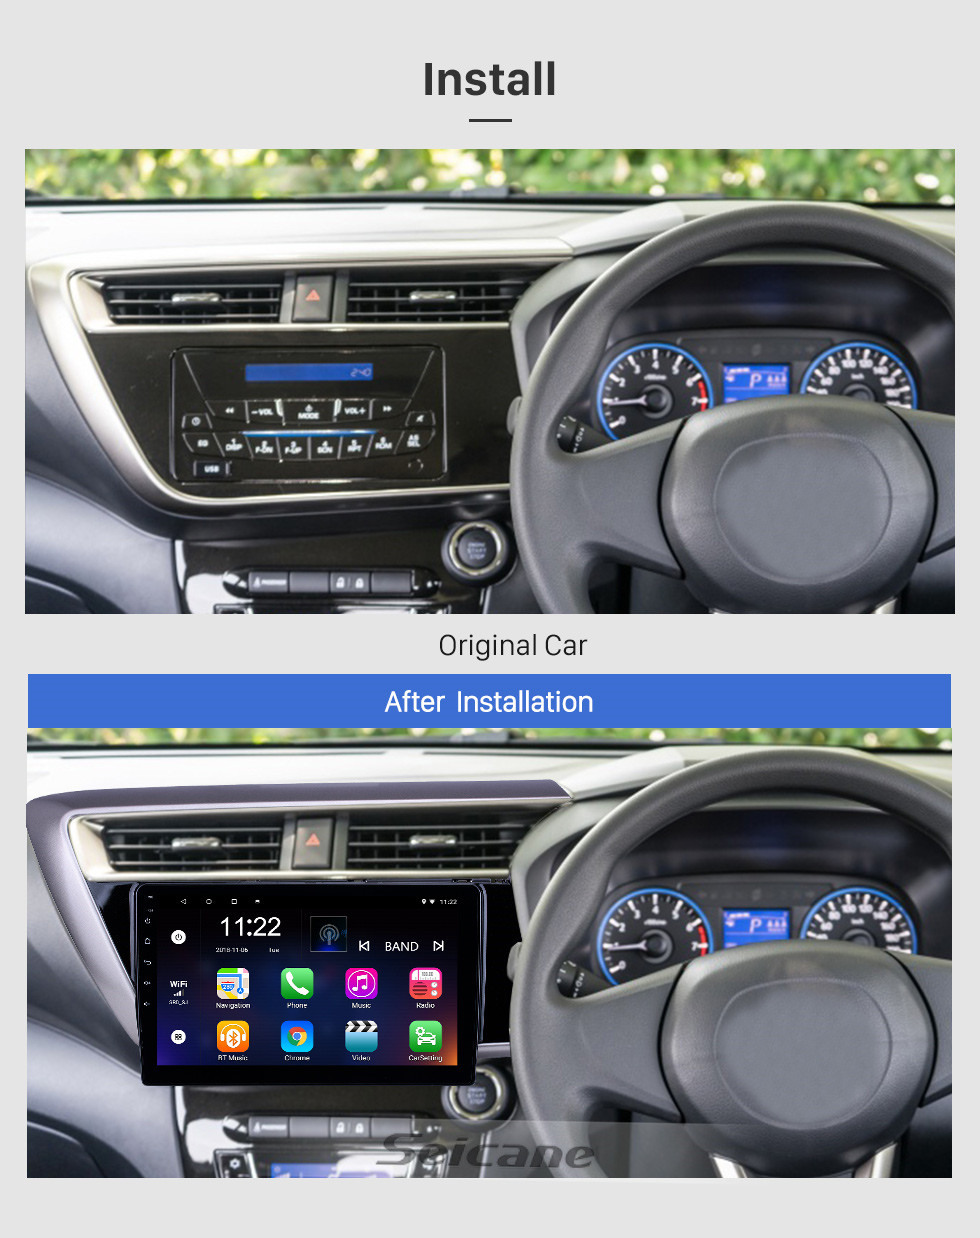 Seicane 10.1 inch Android 10.0 GPS Navigation Radio for 2018 Proton Myvi With HD Touchscreen Bluetooth support Carplay TPMS Digital TV